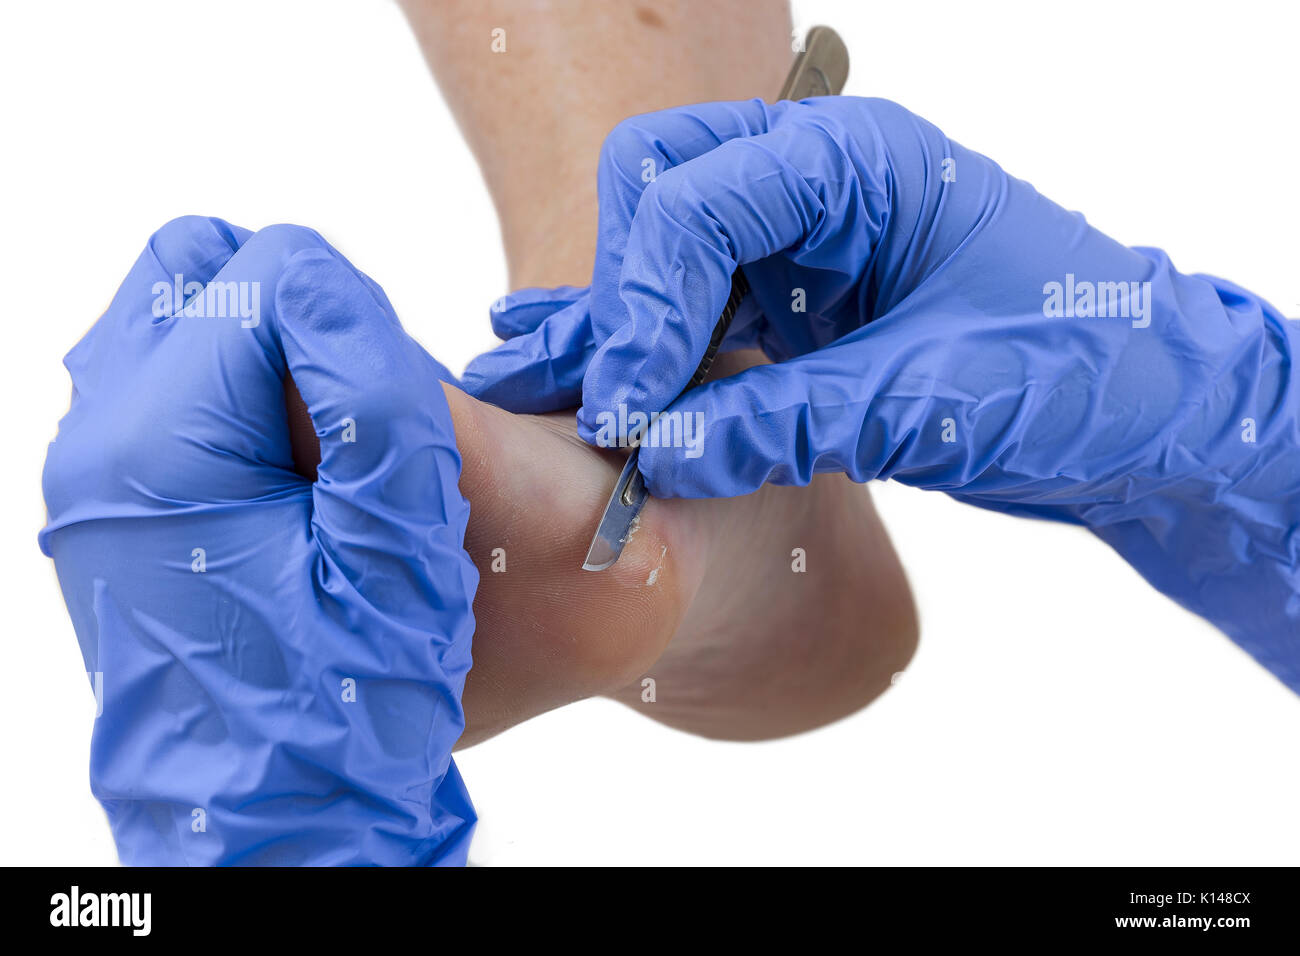 Woman receiving podiatry treatment- podiatrist chiropodist cleaning womans feet Stock Photo